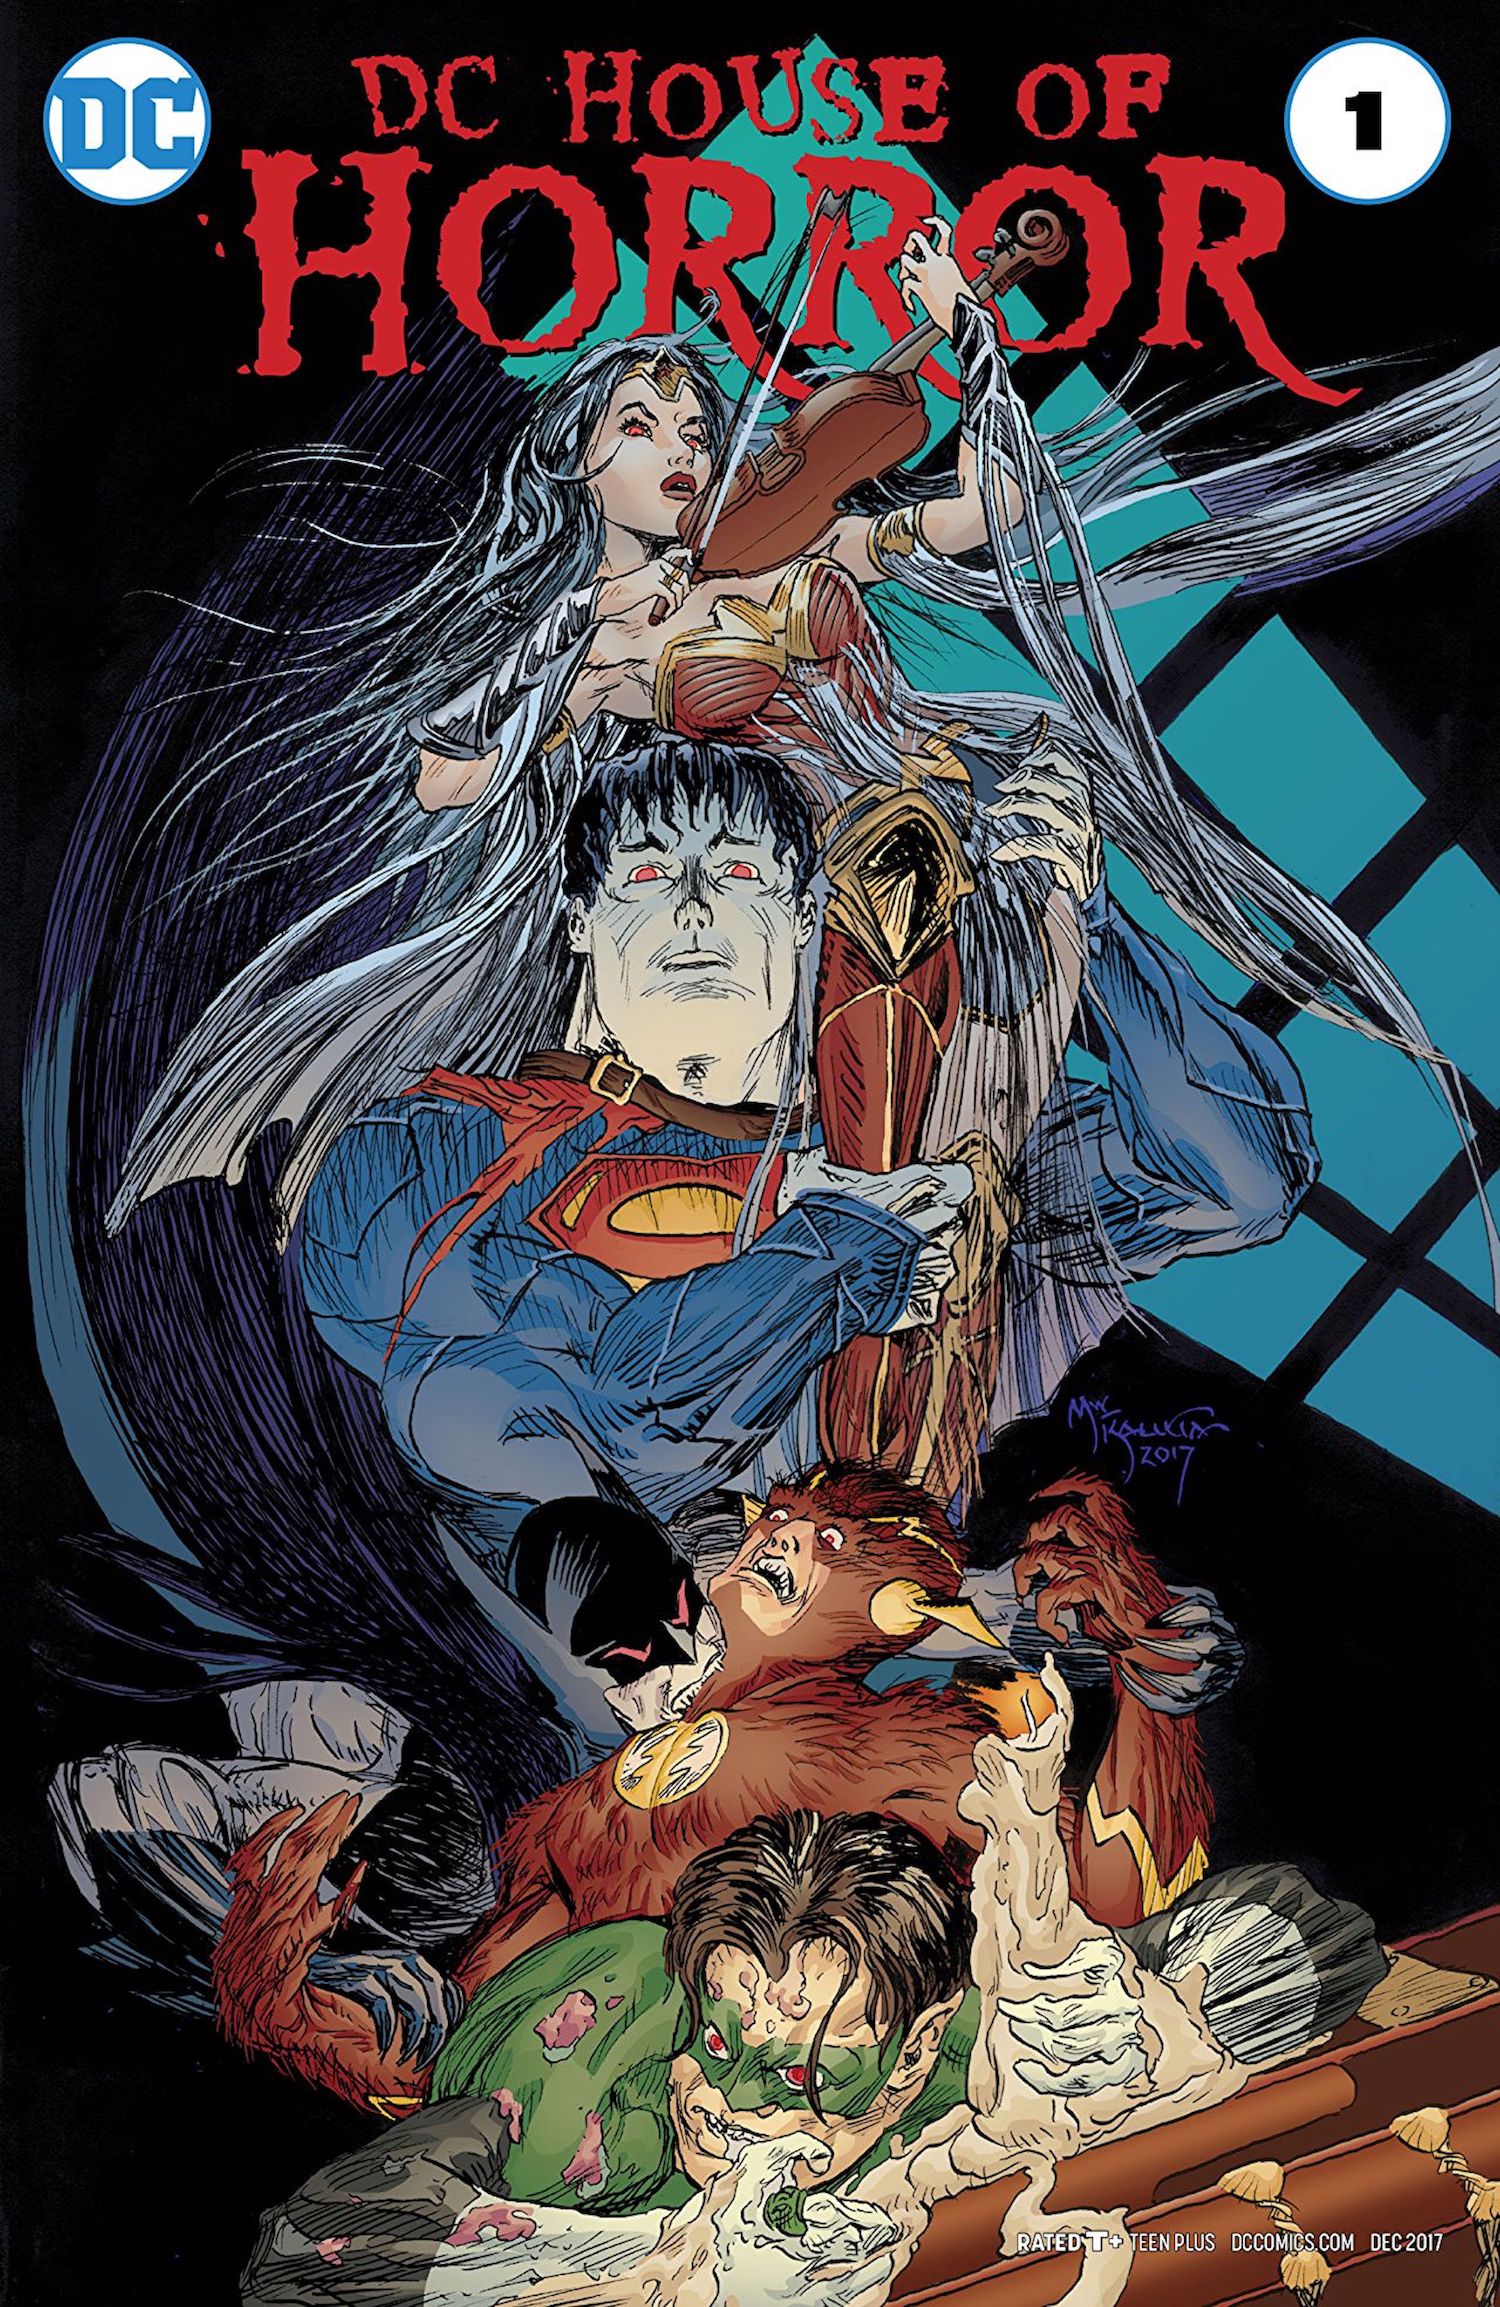 This image is the cover of DC House of Horror Vol 1 #1 (2017), where Superman, Wonder Woman, Batman, The Green Goblin and Flash can be seen turning into monsters. 